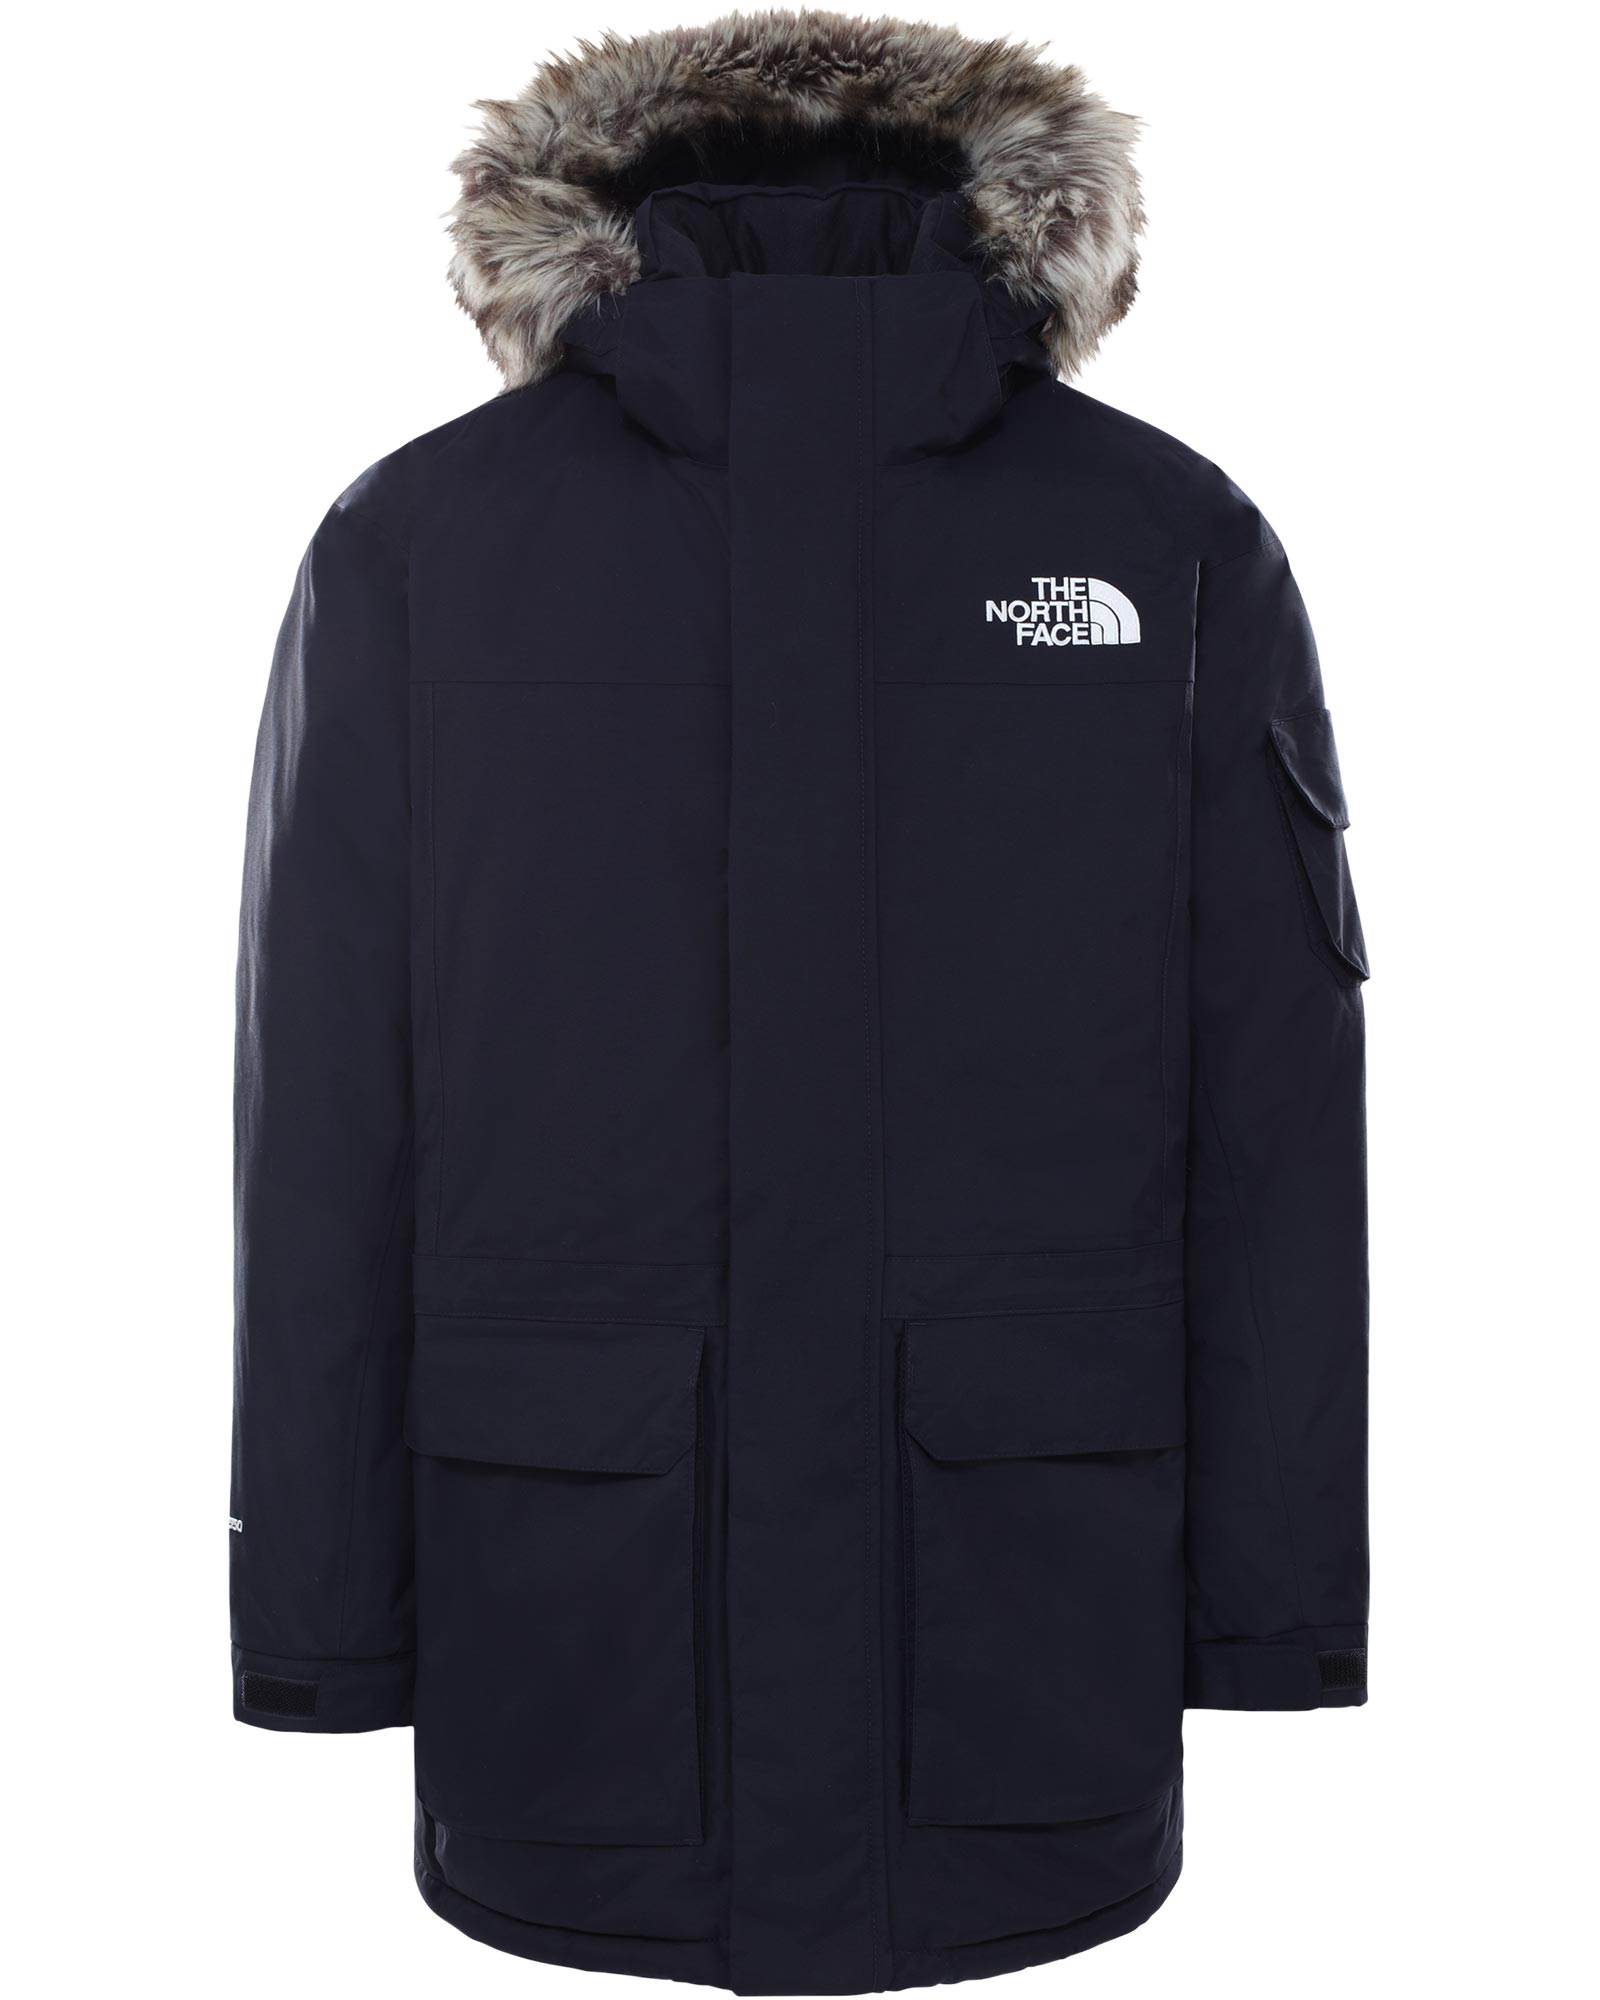 the north face winter jacket mens